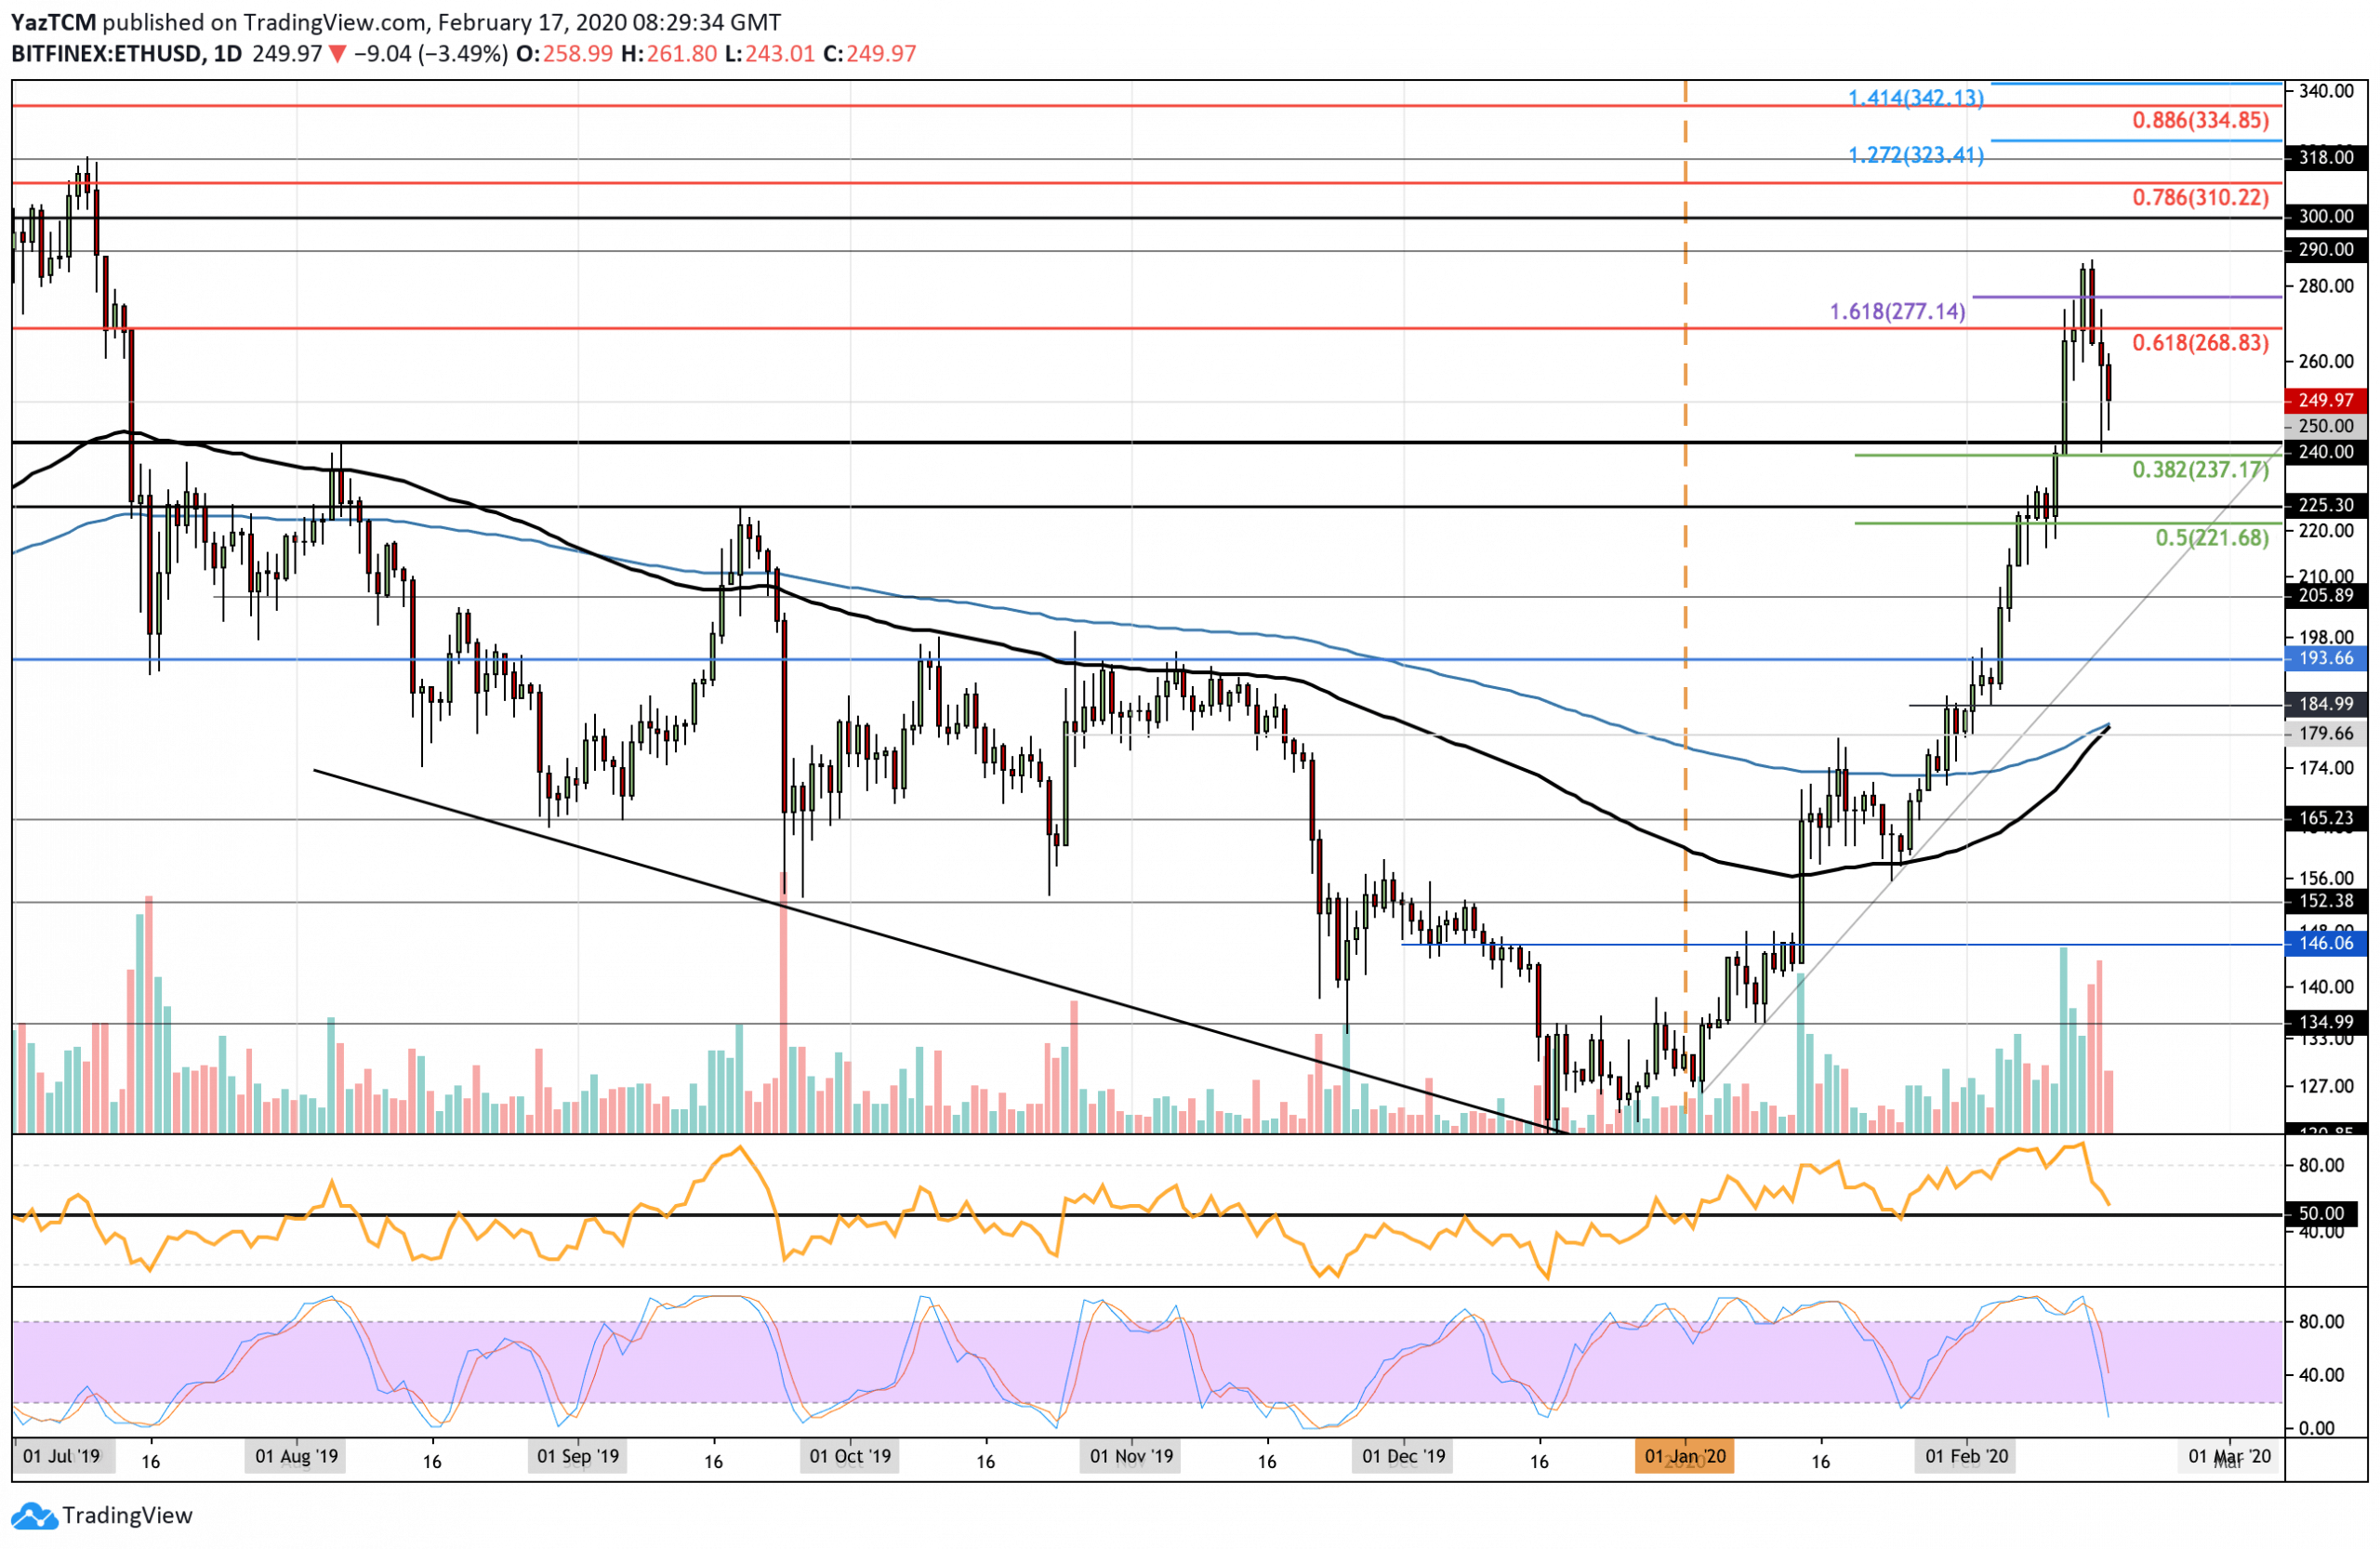 Ethereum Price Analysis: ETH Plummets Back To $250, Will The Crucial Support Hold?